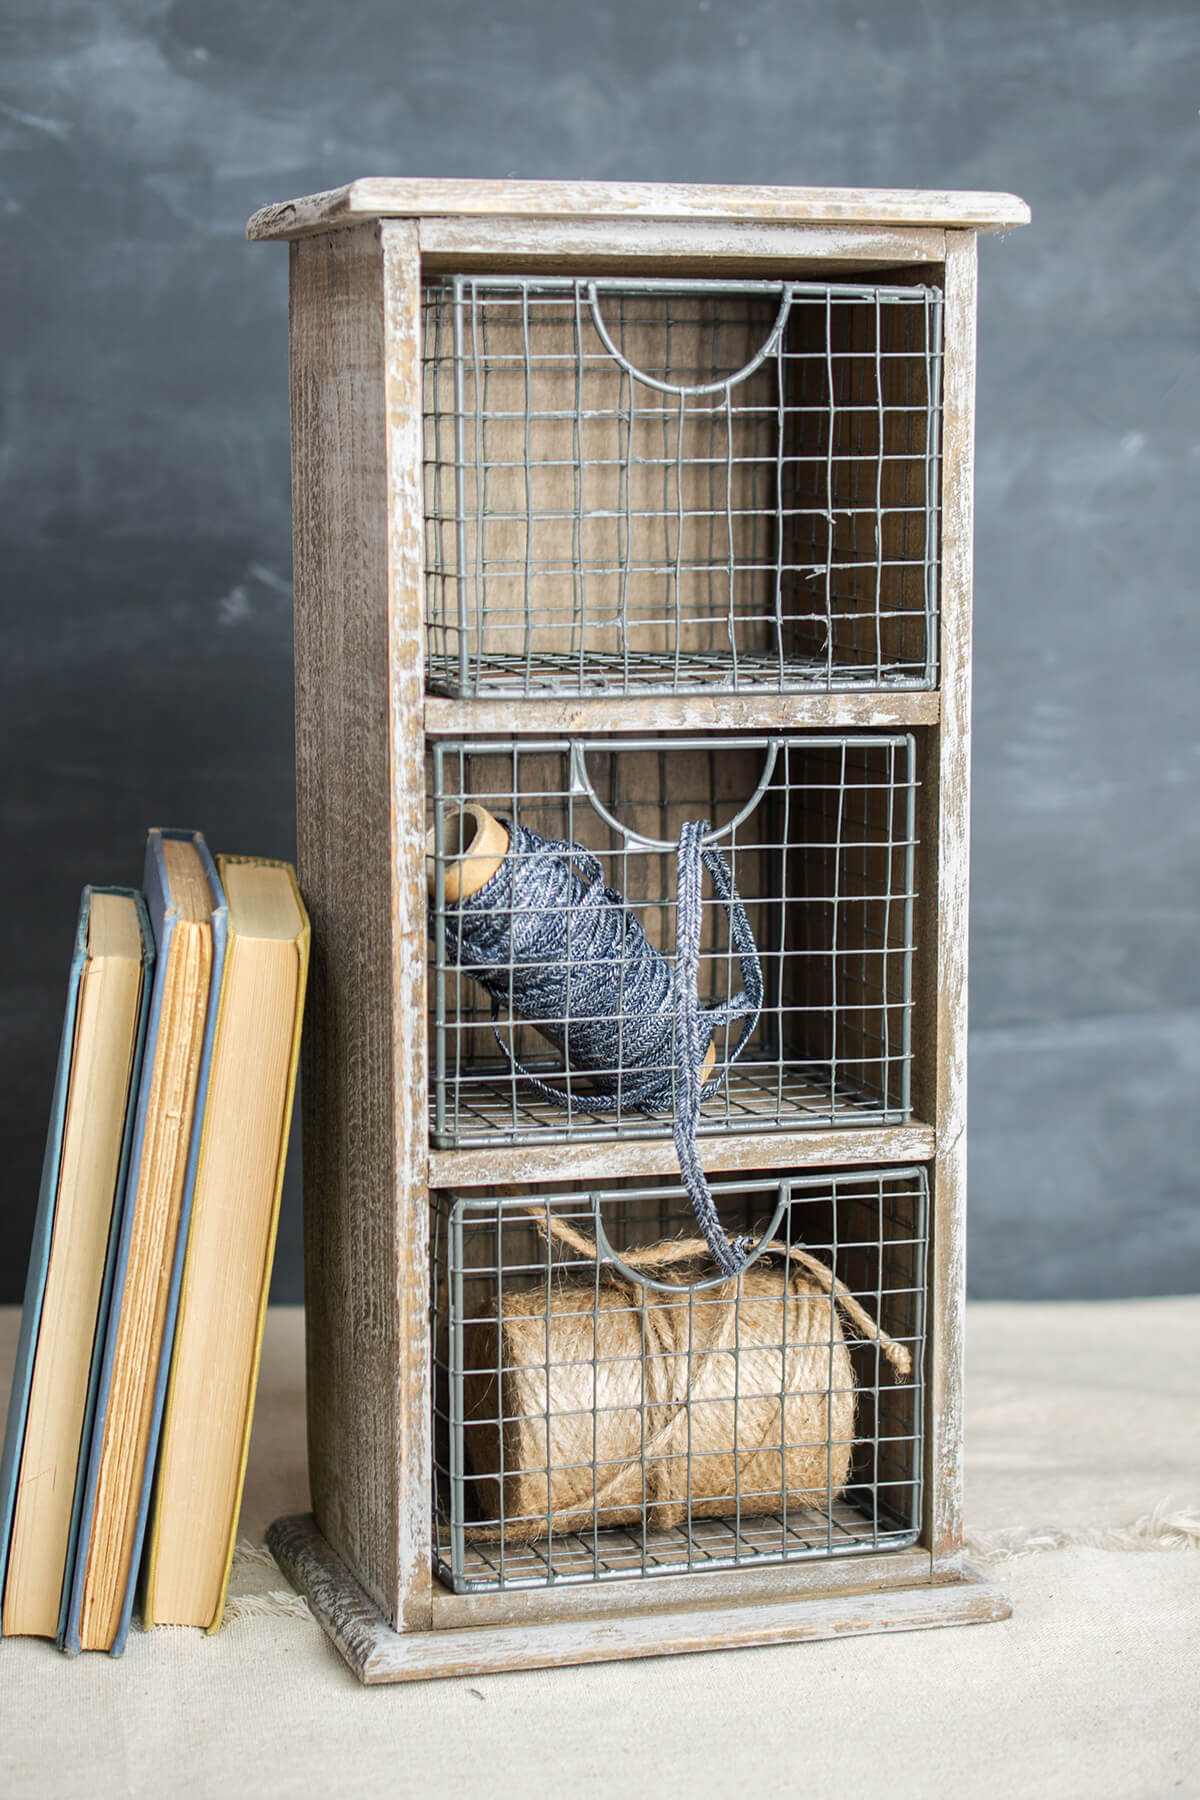 Tabletop Storage  with 3 Wire Baskets 14"